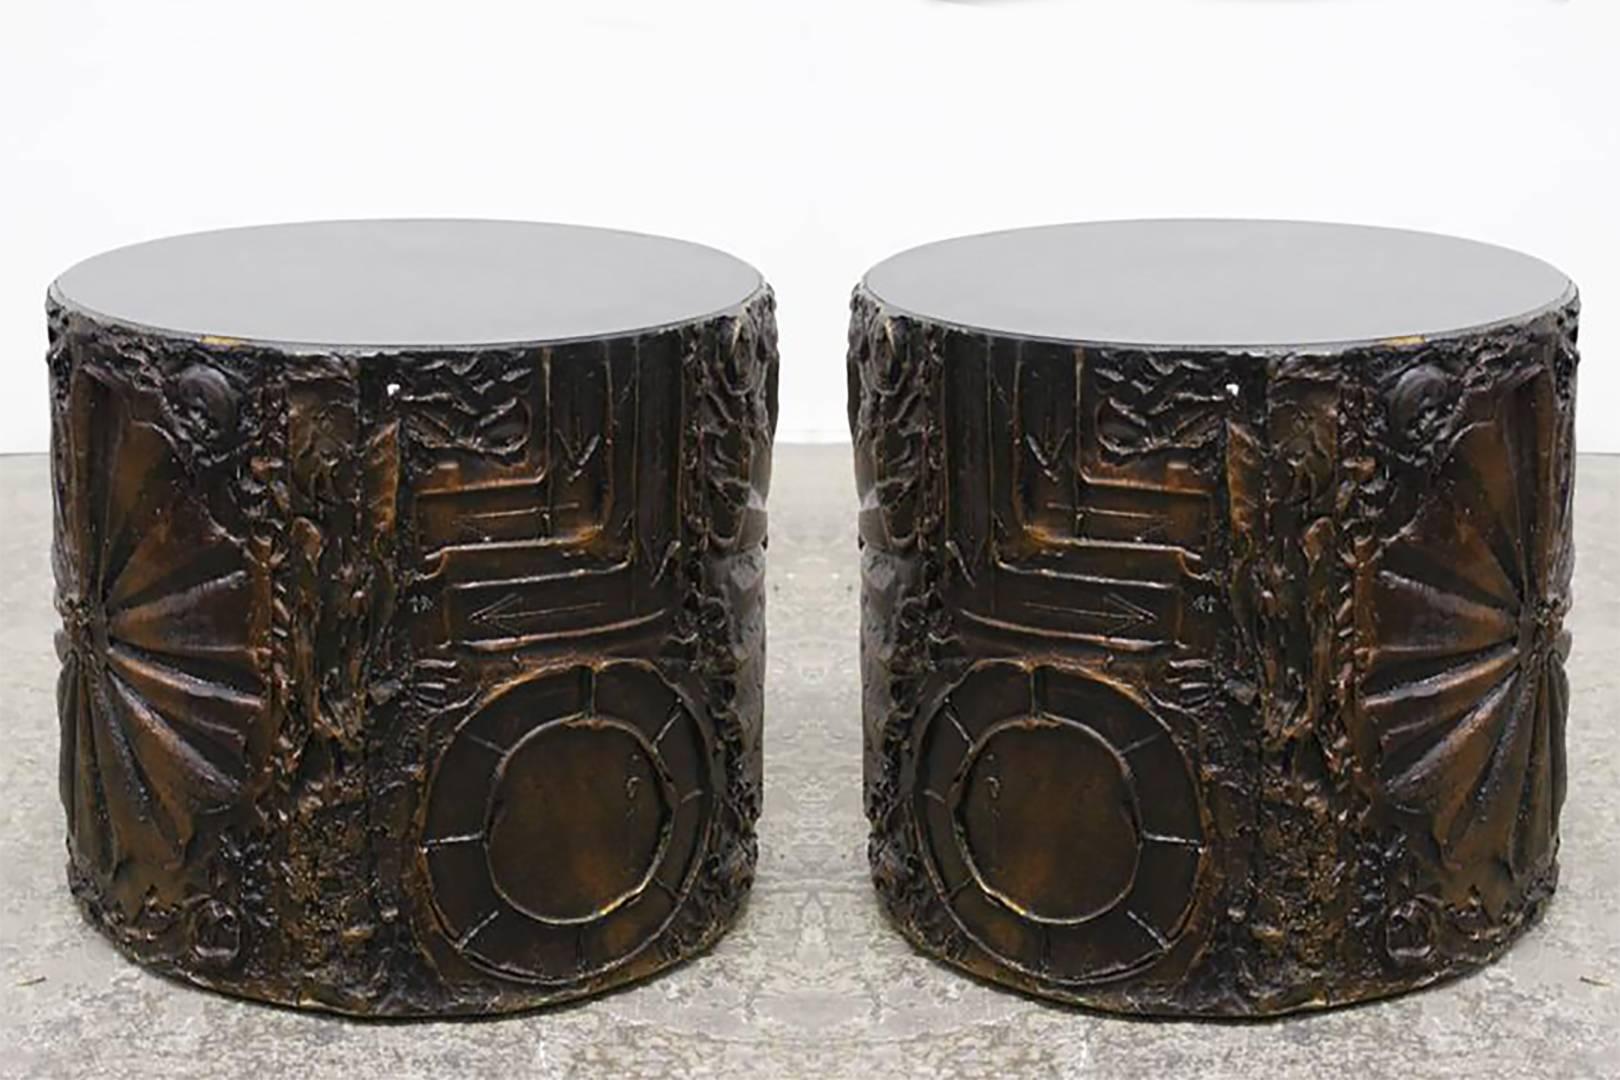 Pair of Brutalist side tables in dark bronze and black cast resin by Adrian Pearsall for Craft Associates. There is wear do to age and use, but in good vintage condition, circa 1960s

Dimensions: 17.5